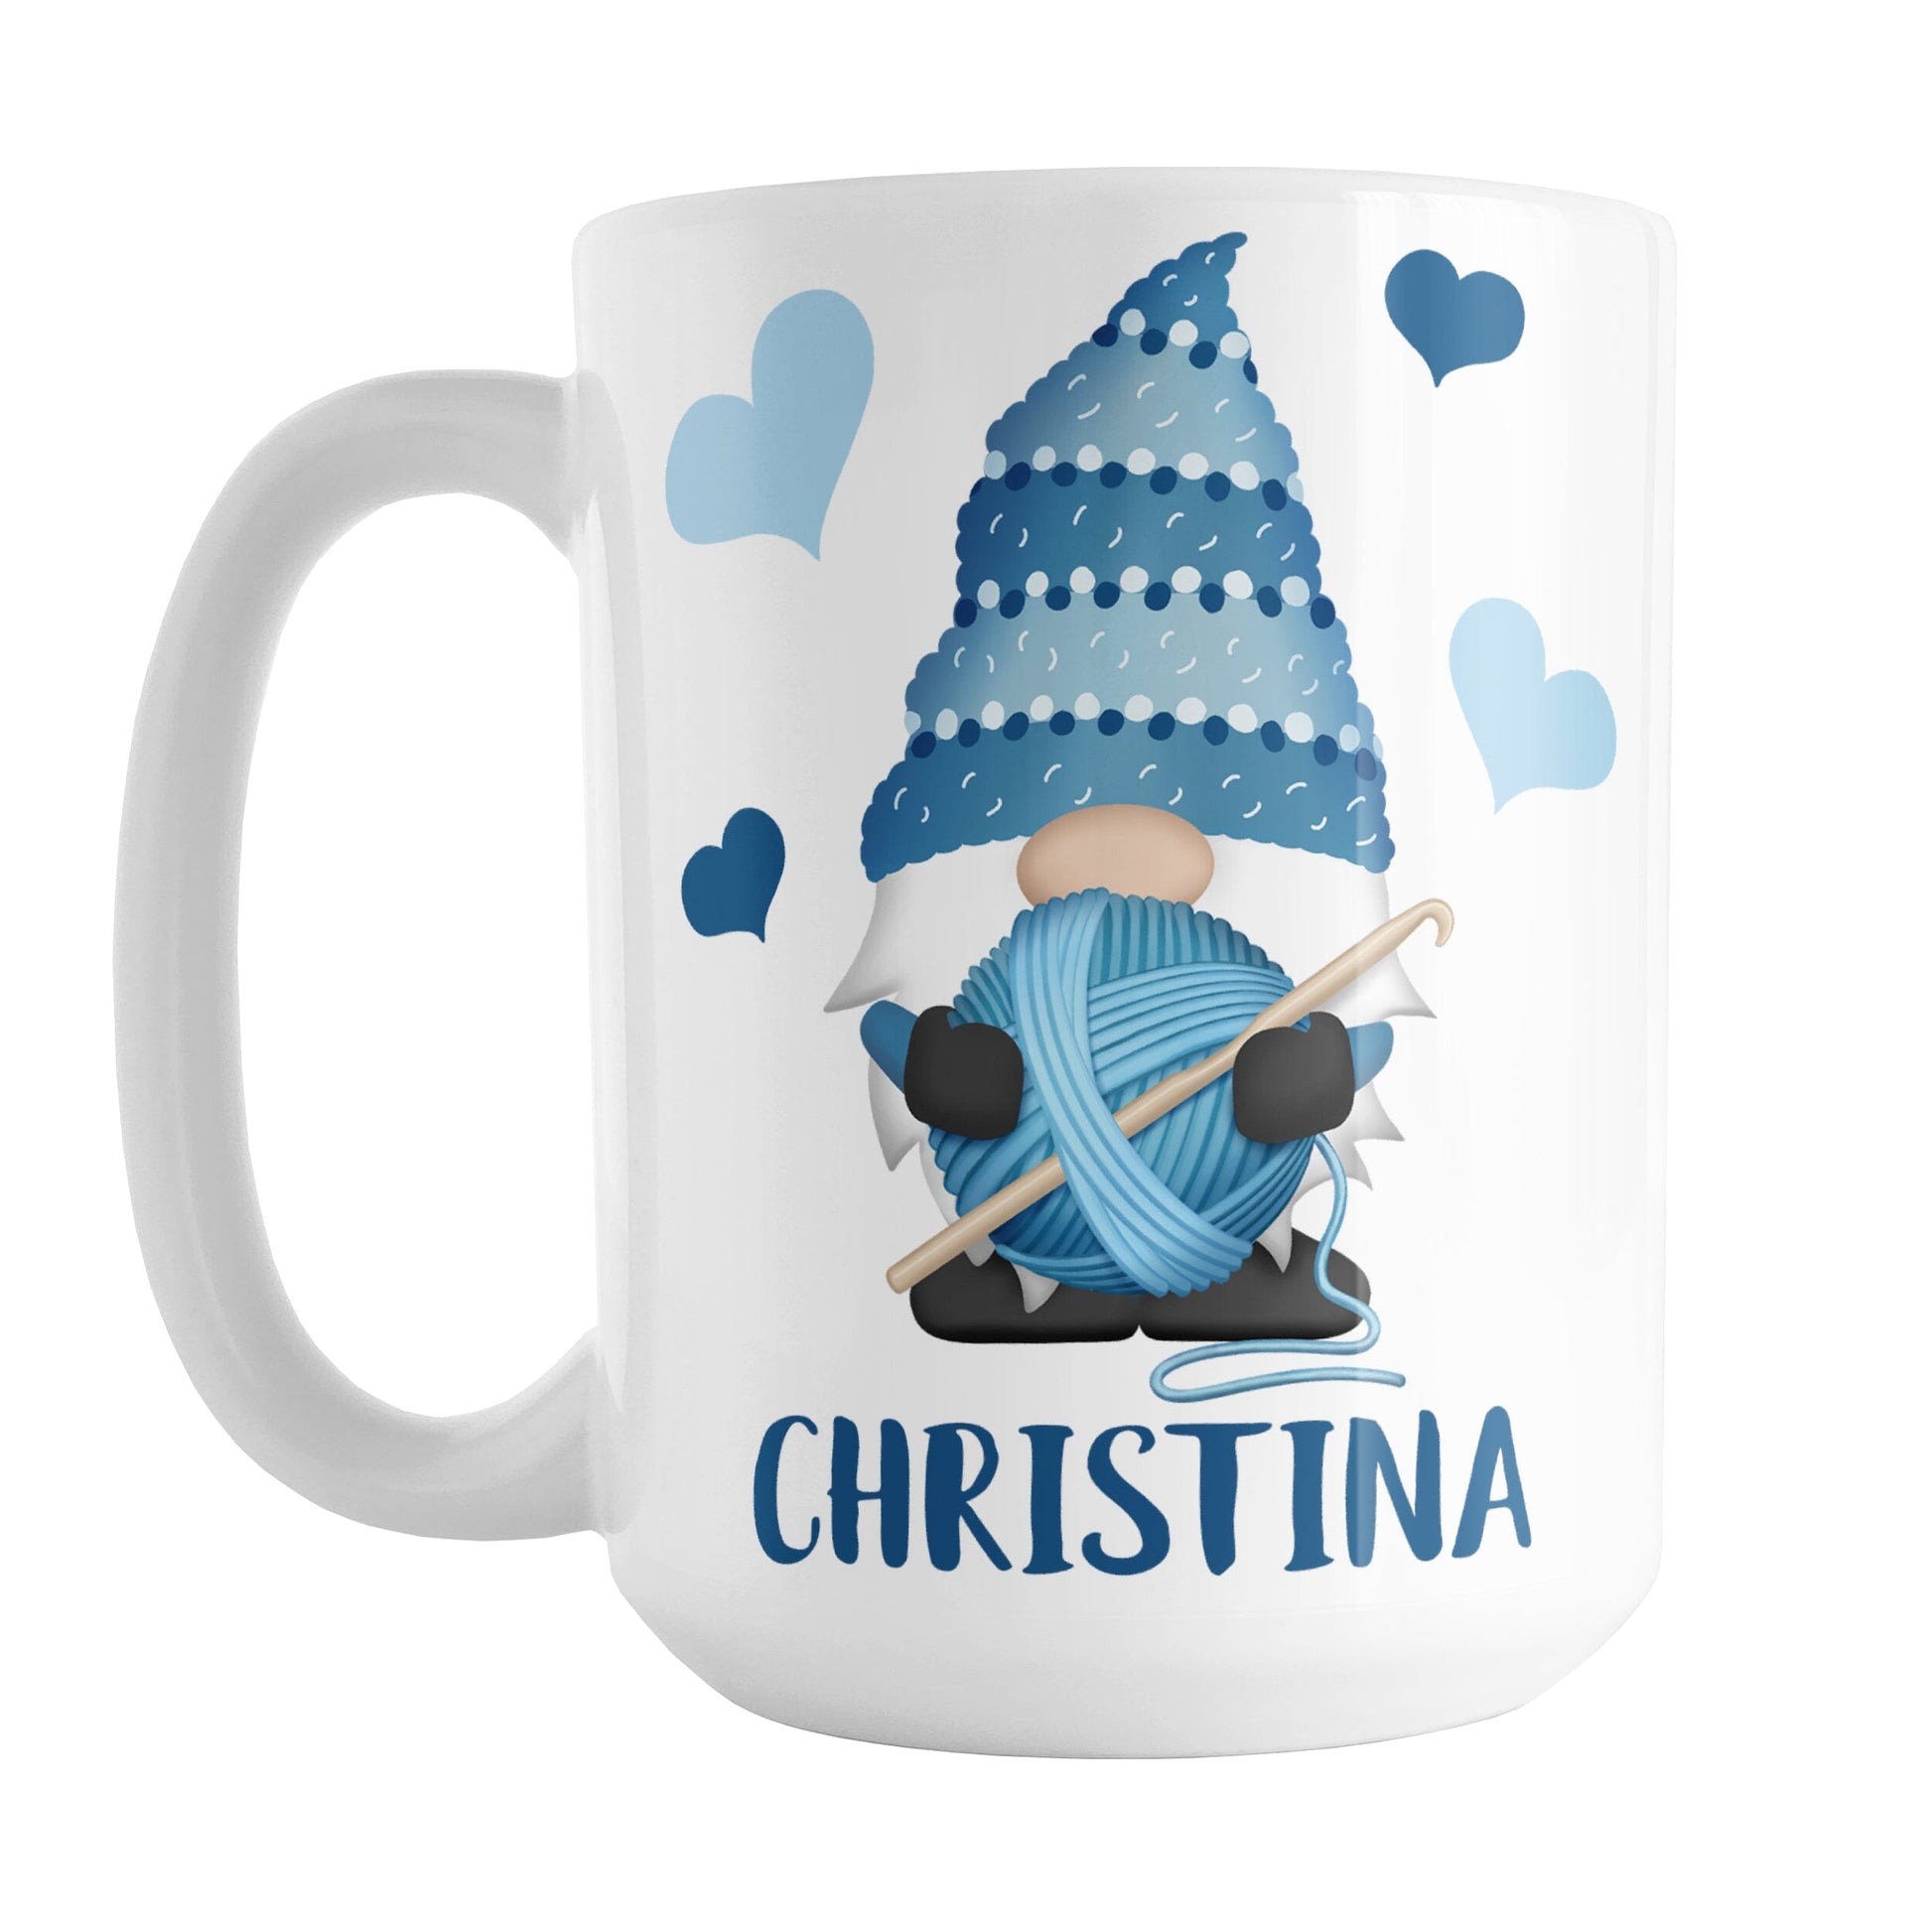 Personalized Blue Crochet Gnome Mug (15oz) at Amy's Coffee Mugs. A ceramic coffee mug designed with a cute gnome wearing a blue crochet hat while holding a ball of blue yarn and a crochet hook with blue hearts around him. Your name is printed in a fun blue font below the gnome. This adorable illustration and personalization is on both sides of the mug. 